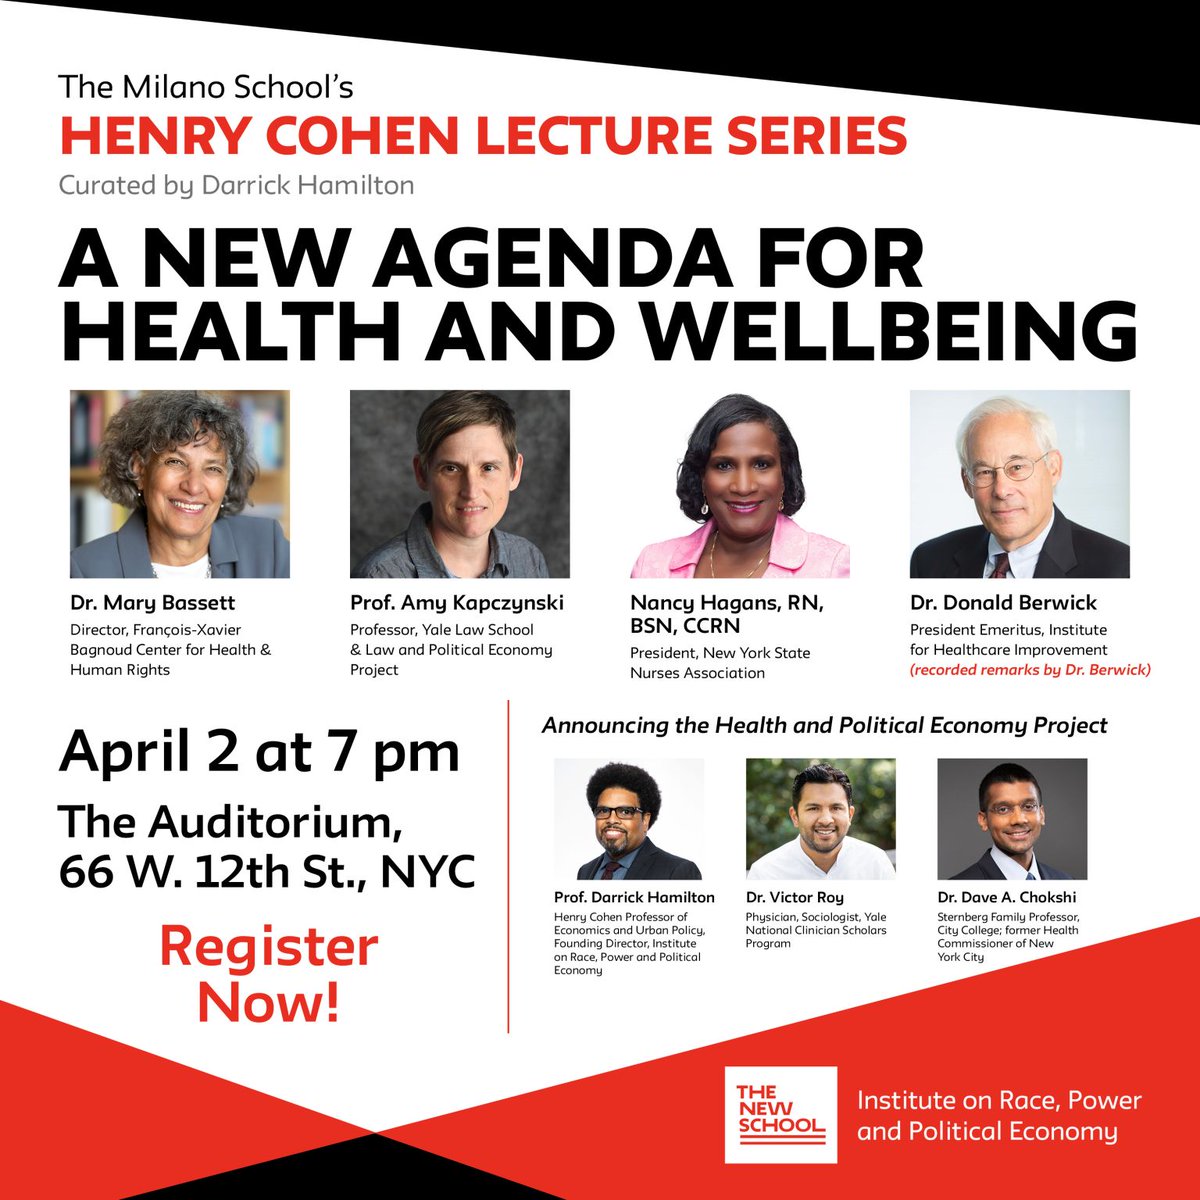 Join us on 4/2 in NYC as we ask, how can we build an economy that enables all people to have what they need to experience health? Excited to announce the new Health & Political Economy Project to tackle such questions. bit.ly/newagendahealth @DarrickHamilton @davechokshi